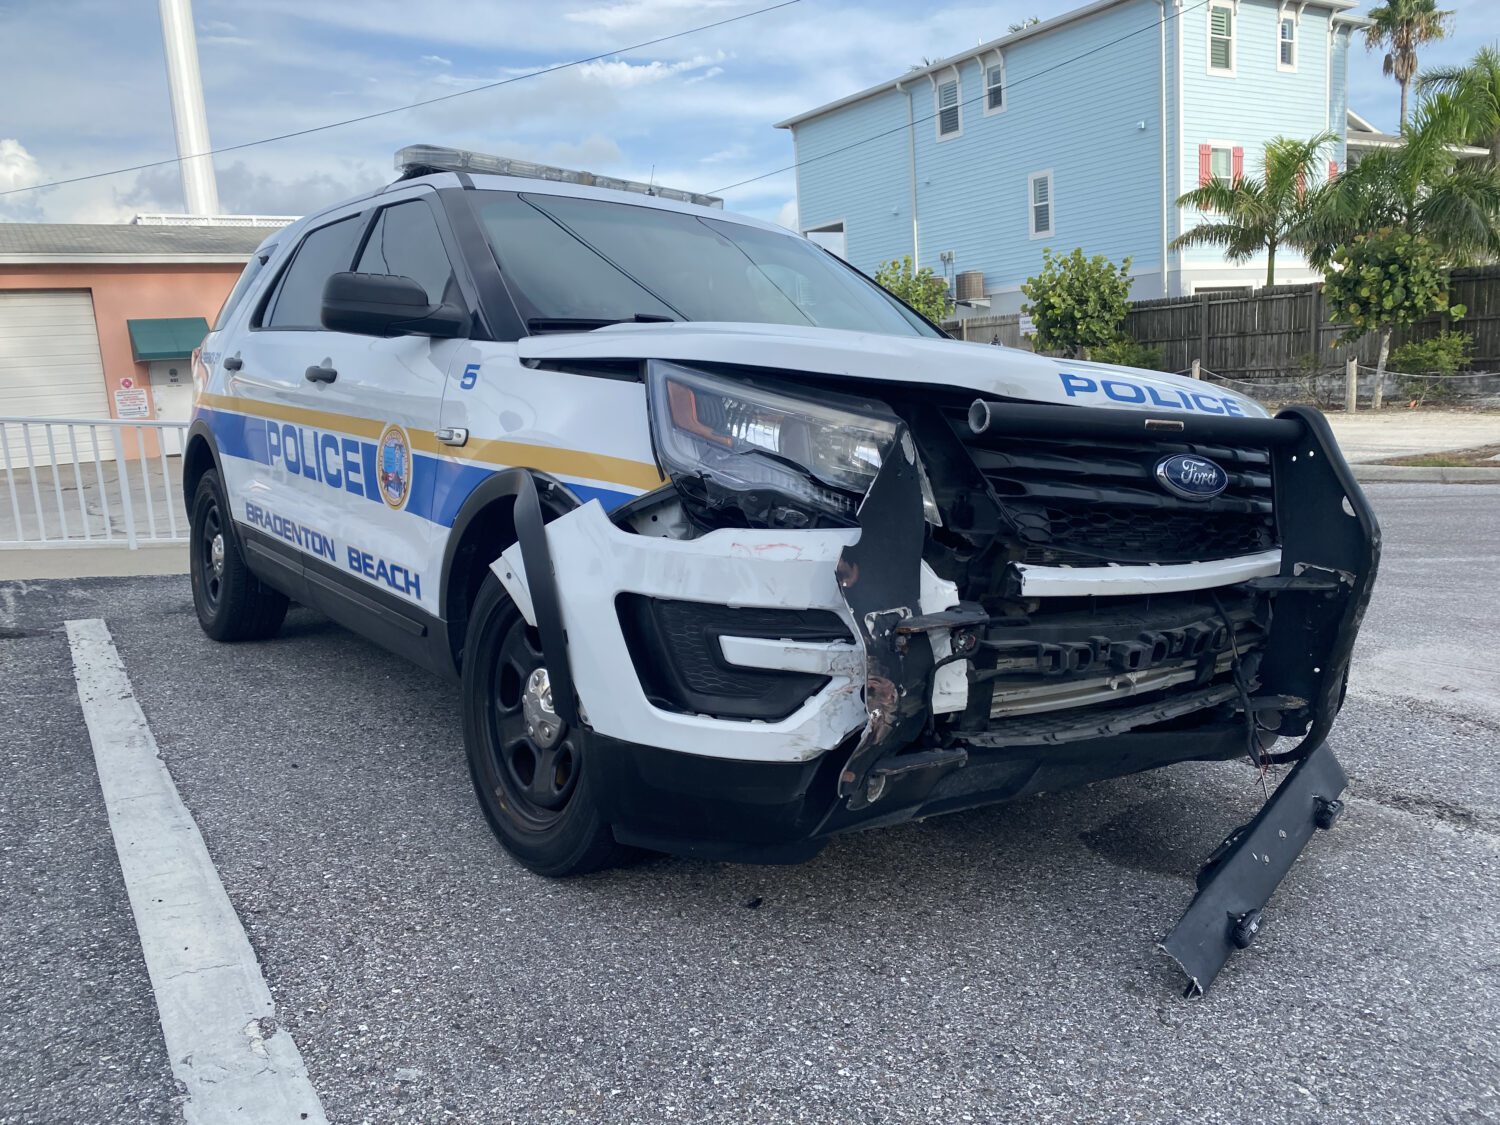 Bradenton police search for stolen cars after fiery crash